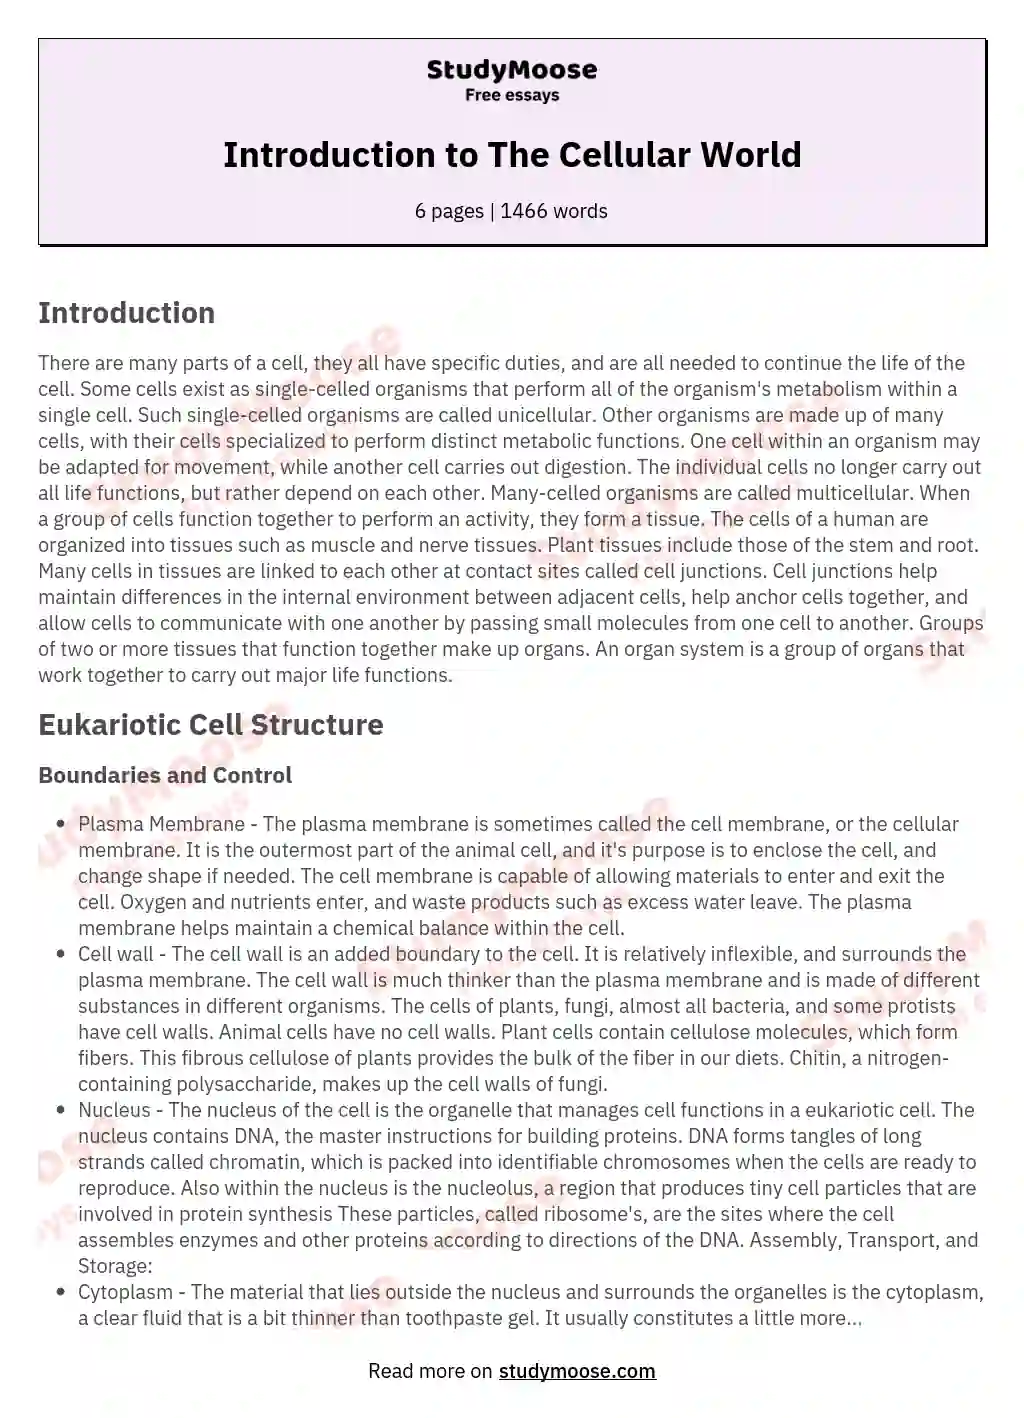 Introduction to The Cellular World essay